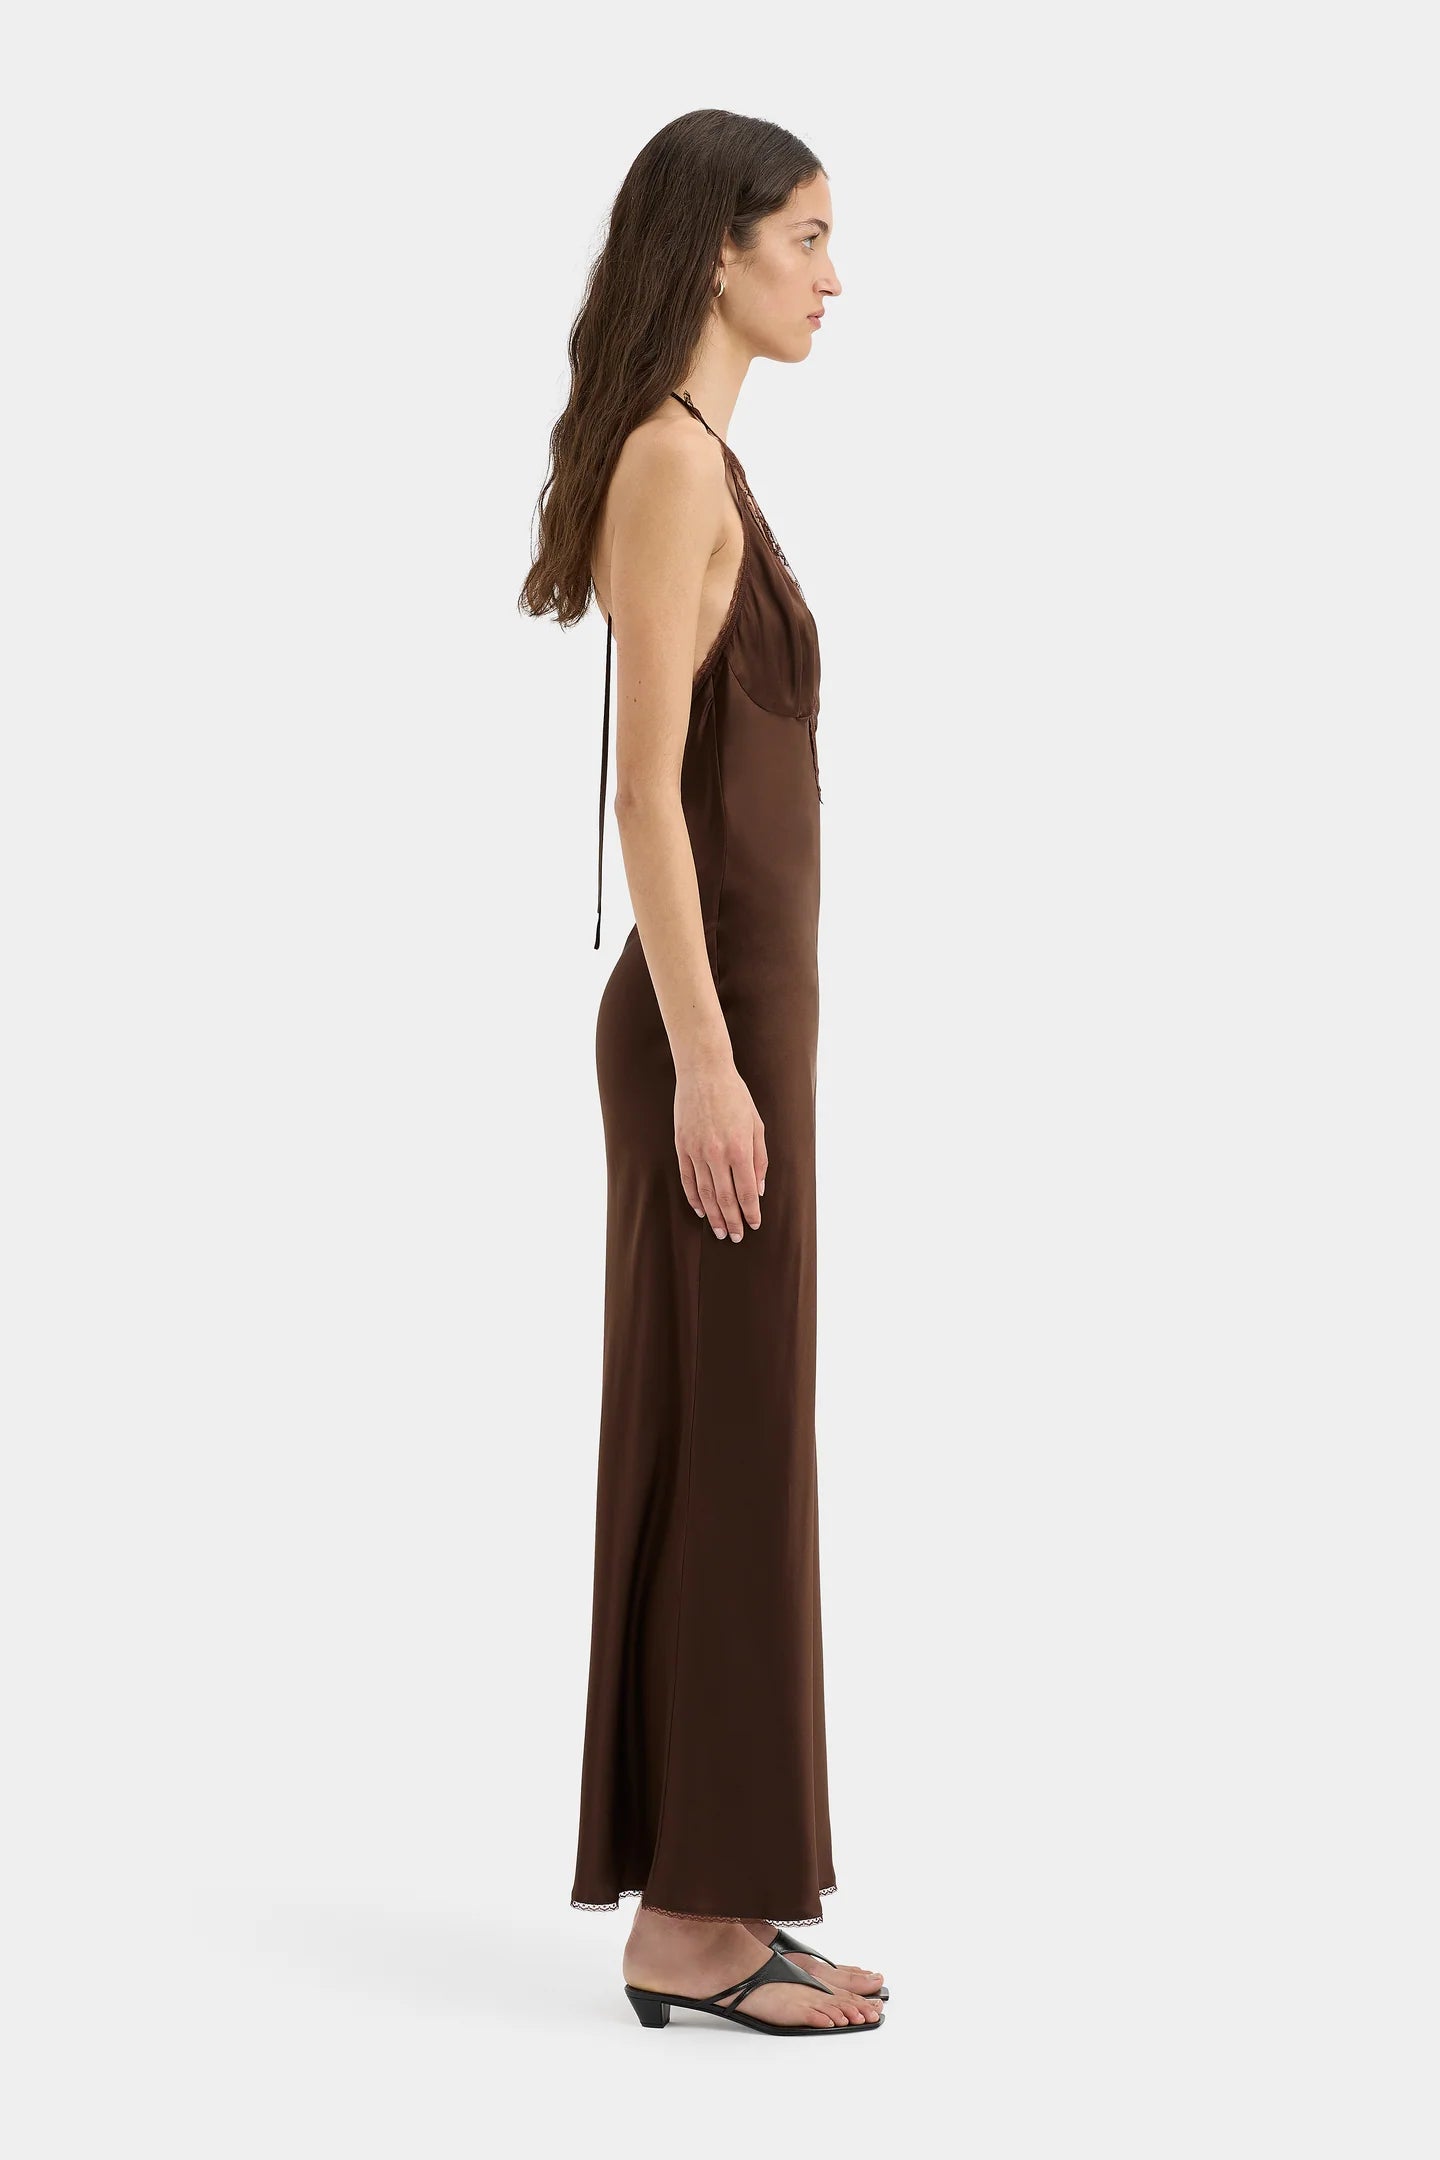 Aries Halter Gown - Chocolate